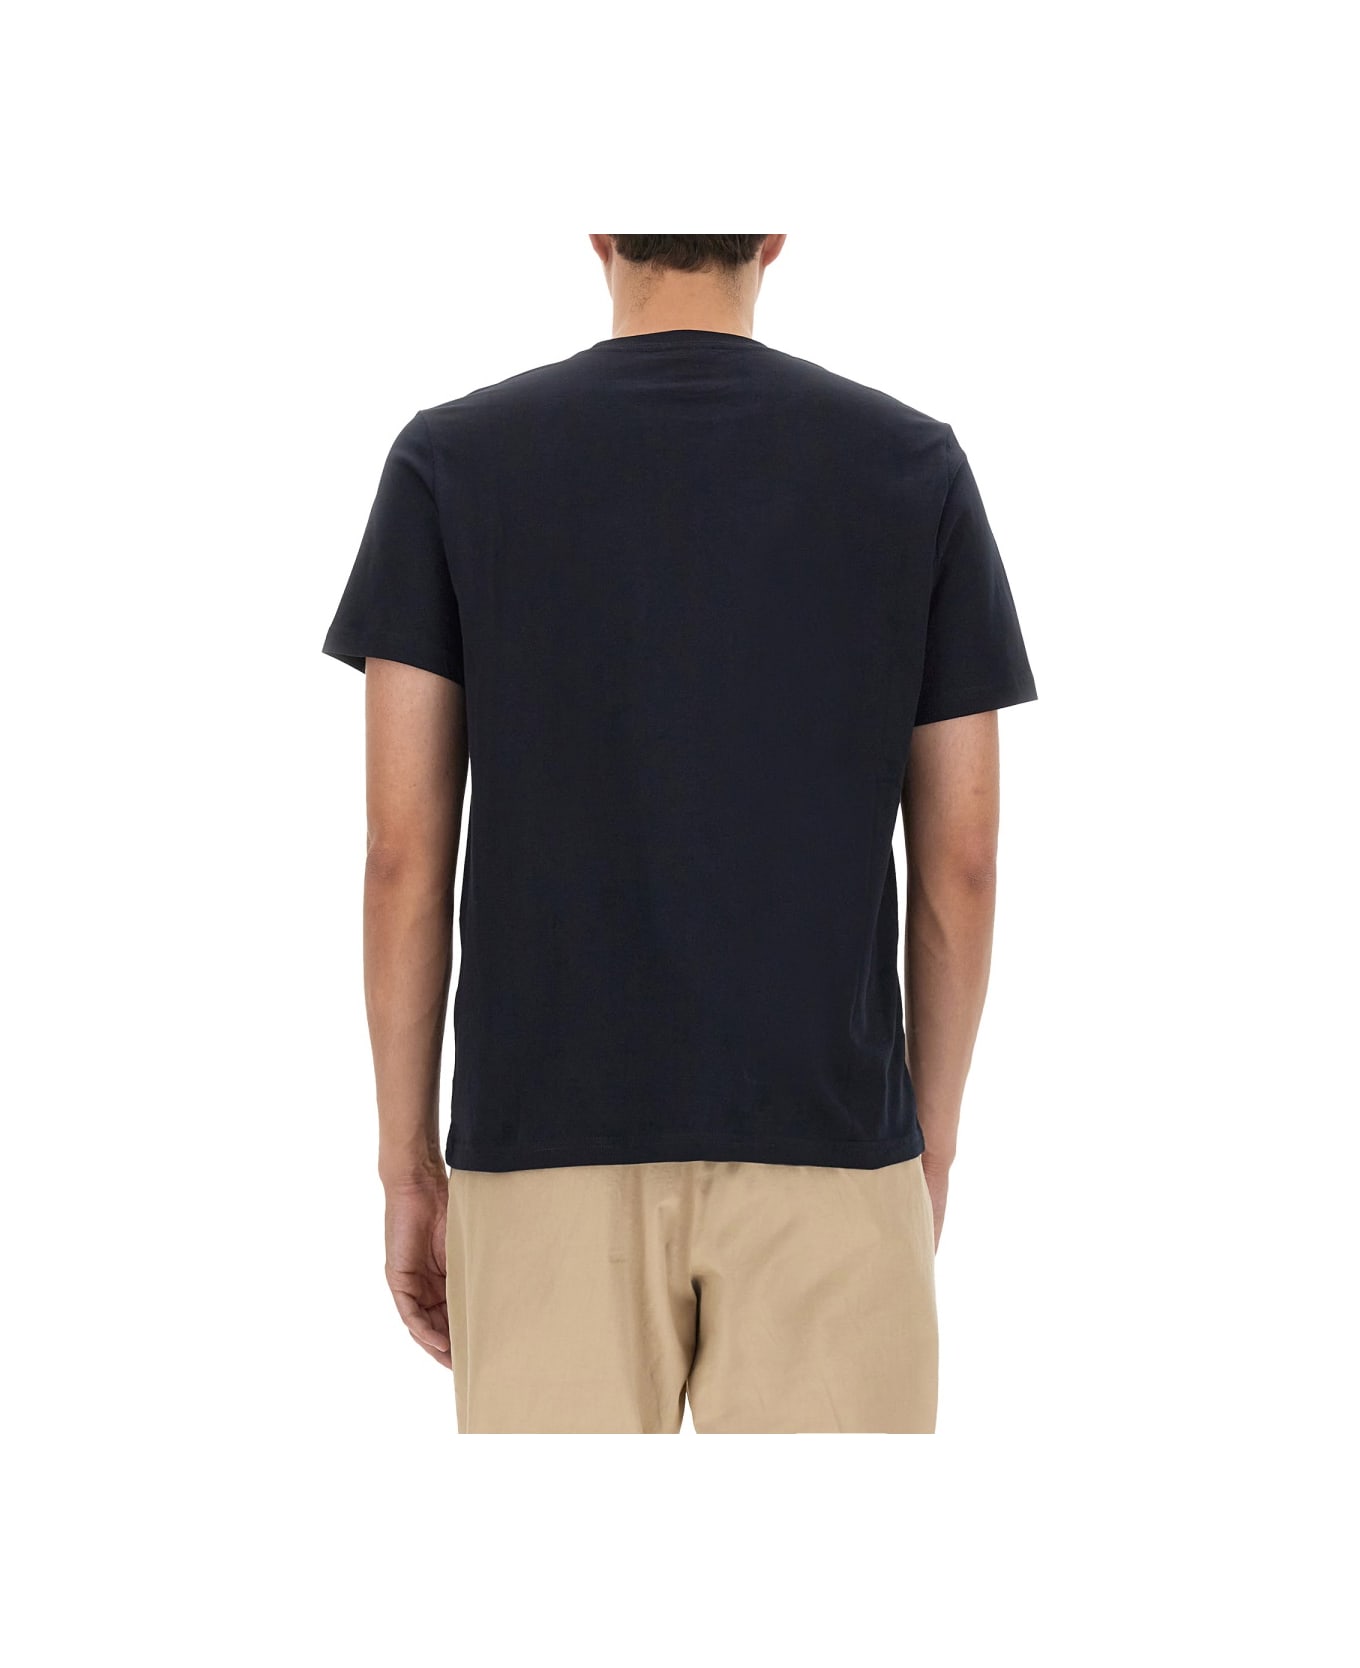 PS by Paul Smith Zebra Patch T-shirt - BLUE シャツ